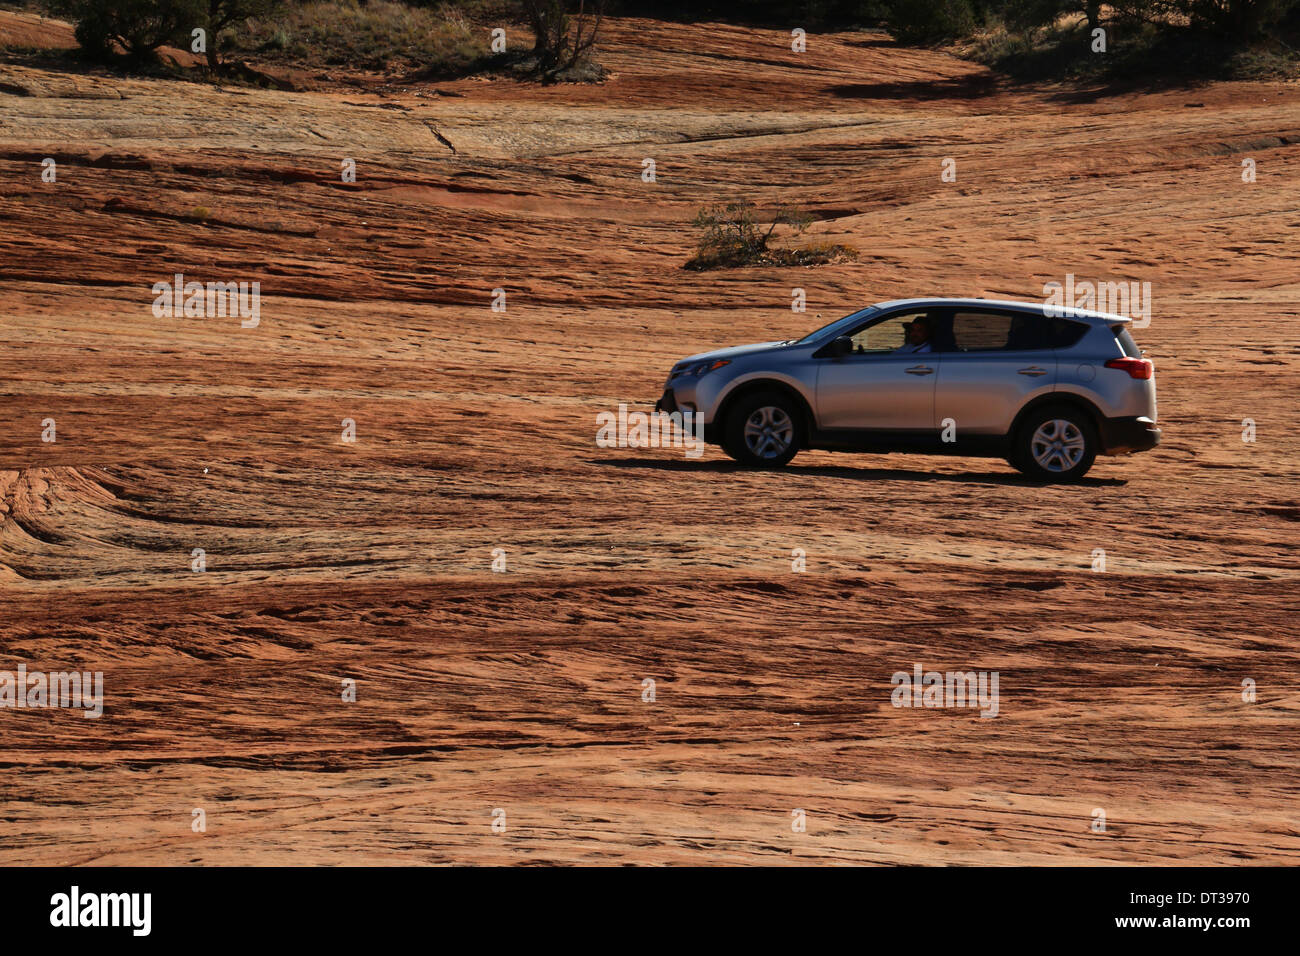 car driving on stripped layered rock, southern Utah Stock Photo